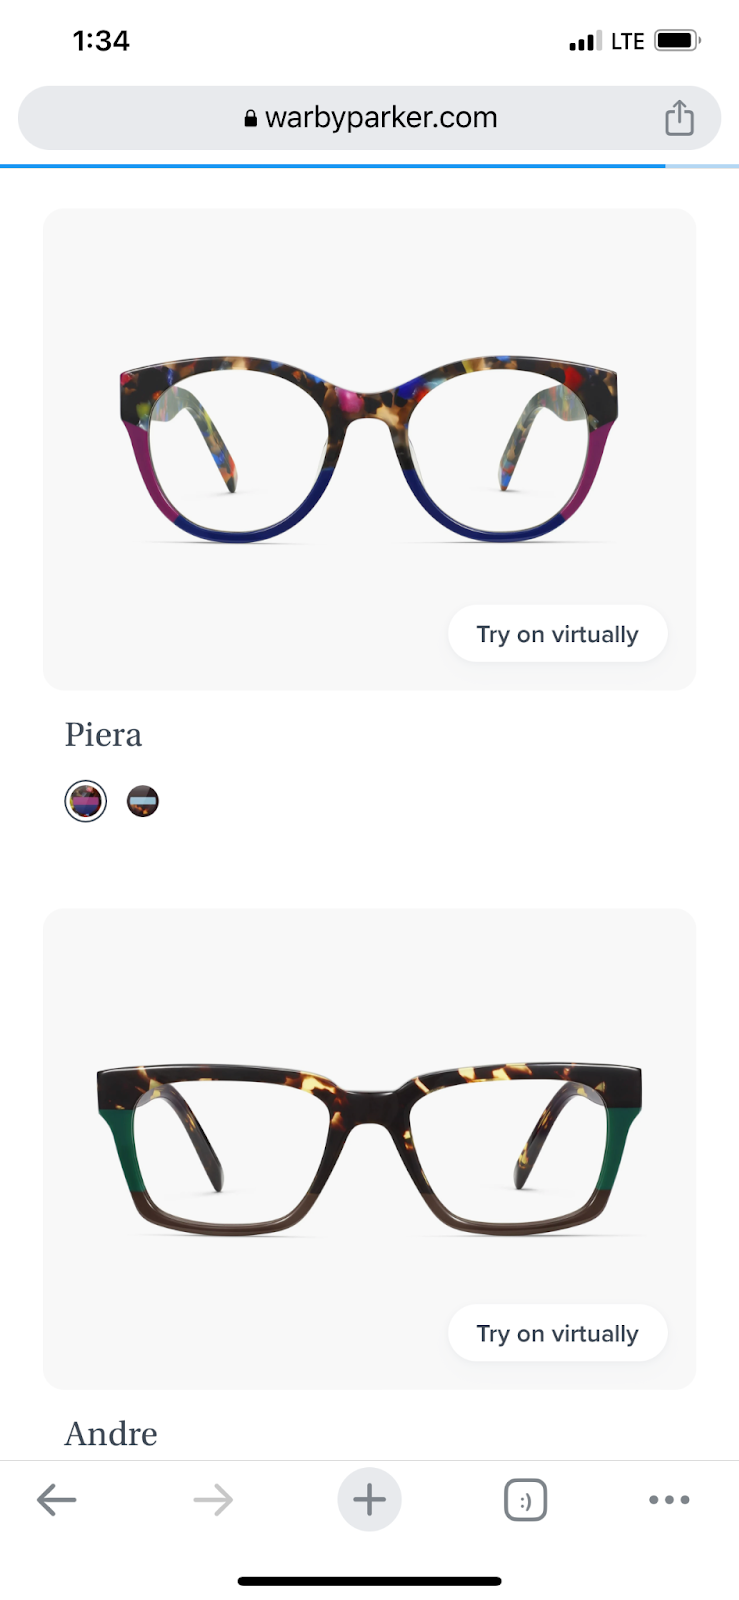 Warby Parker customer experience